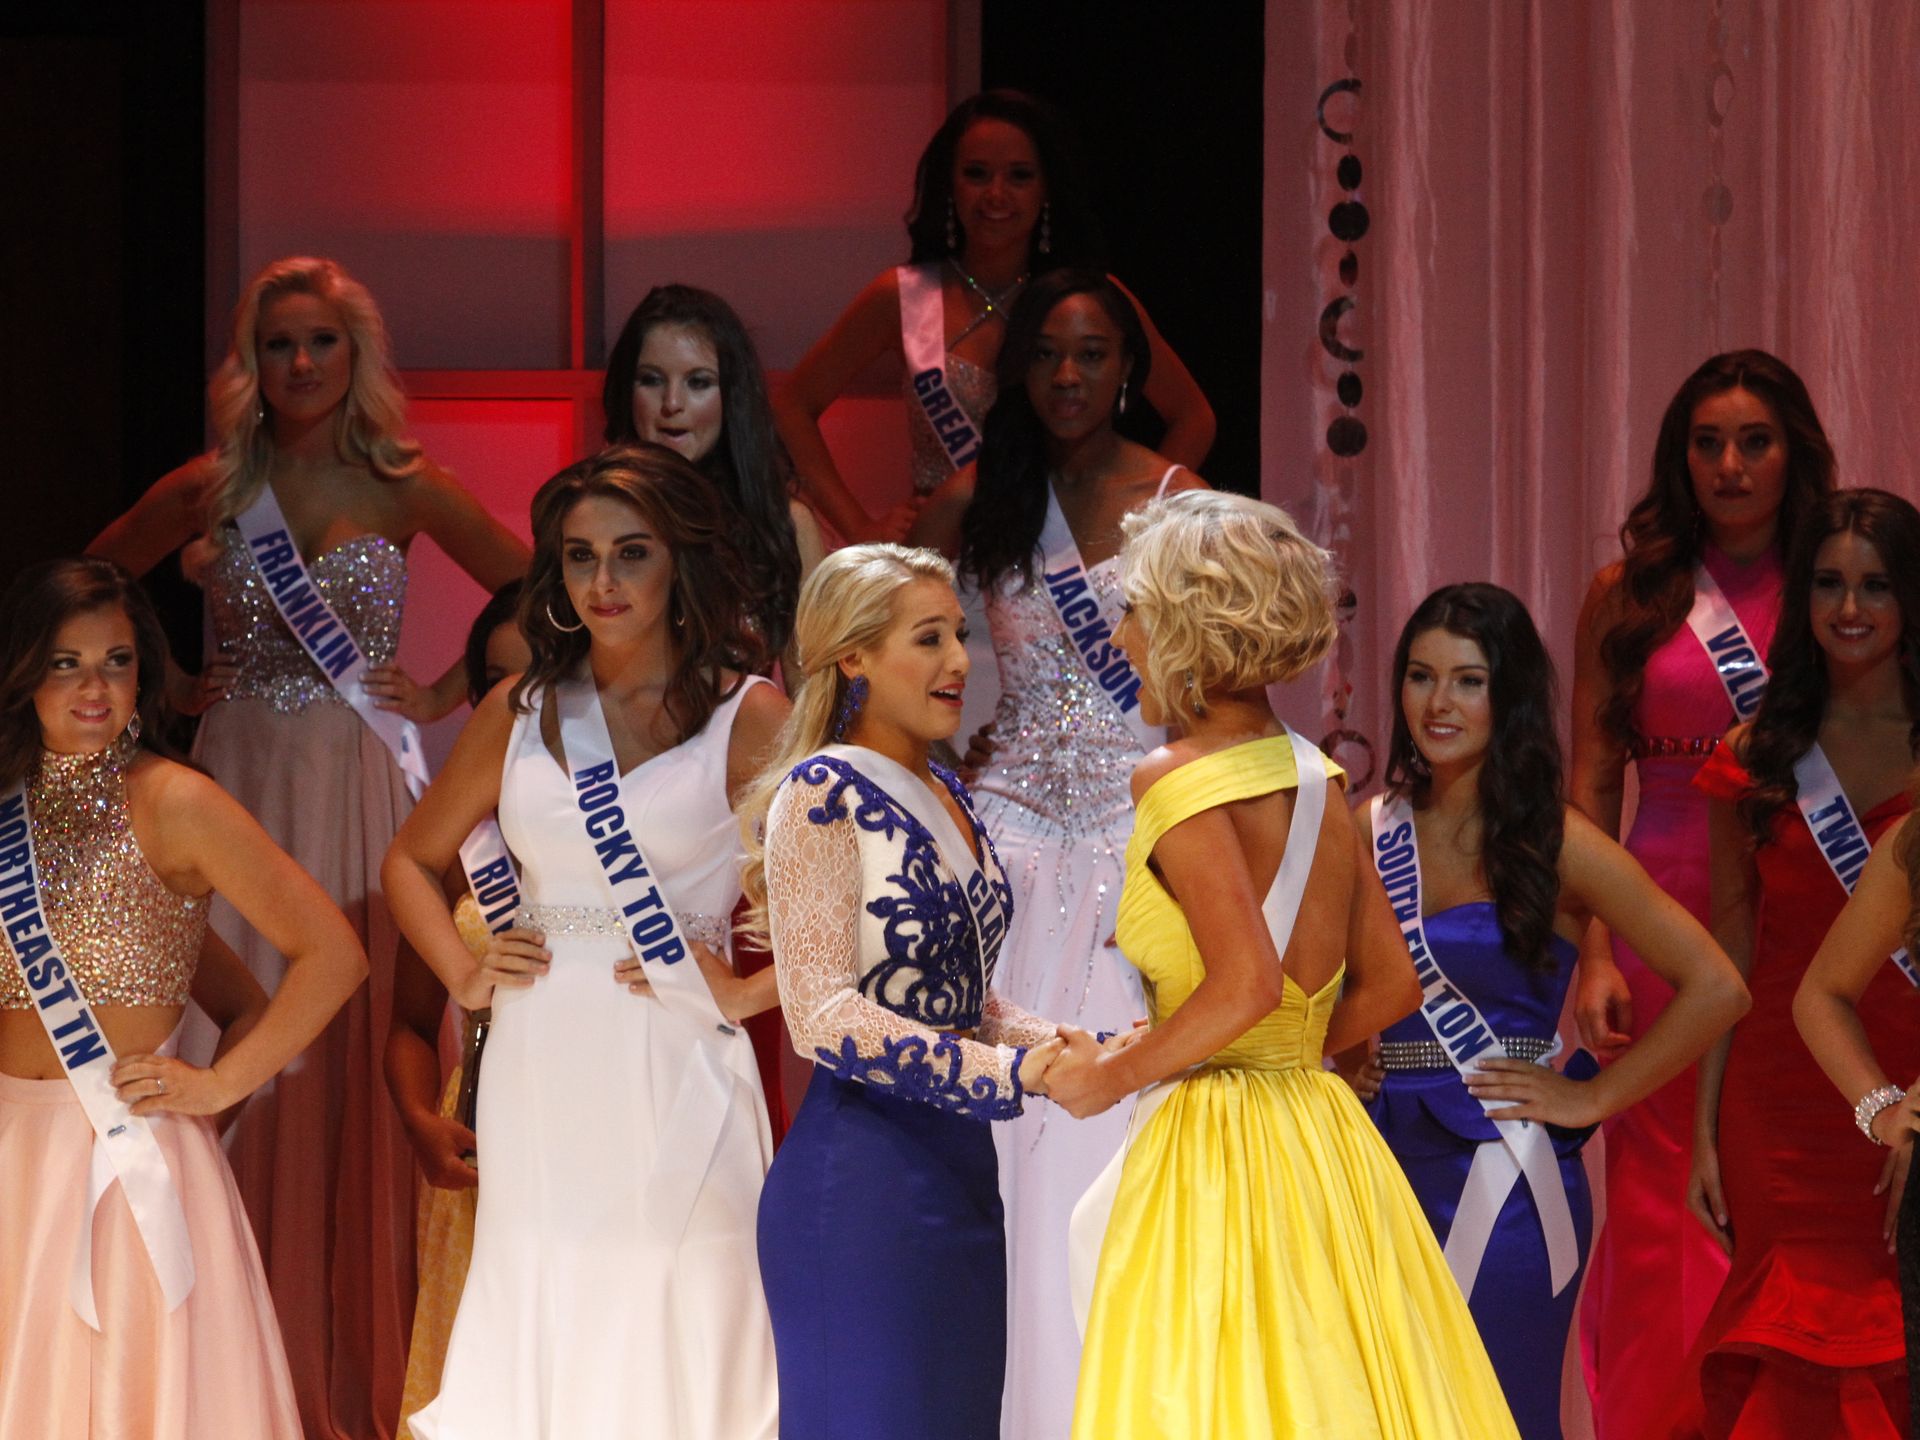 Hope Parker and Savannah Chrisley are the final two at Miss Tennessee Teen USA 2016